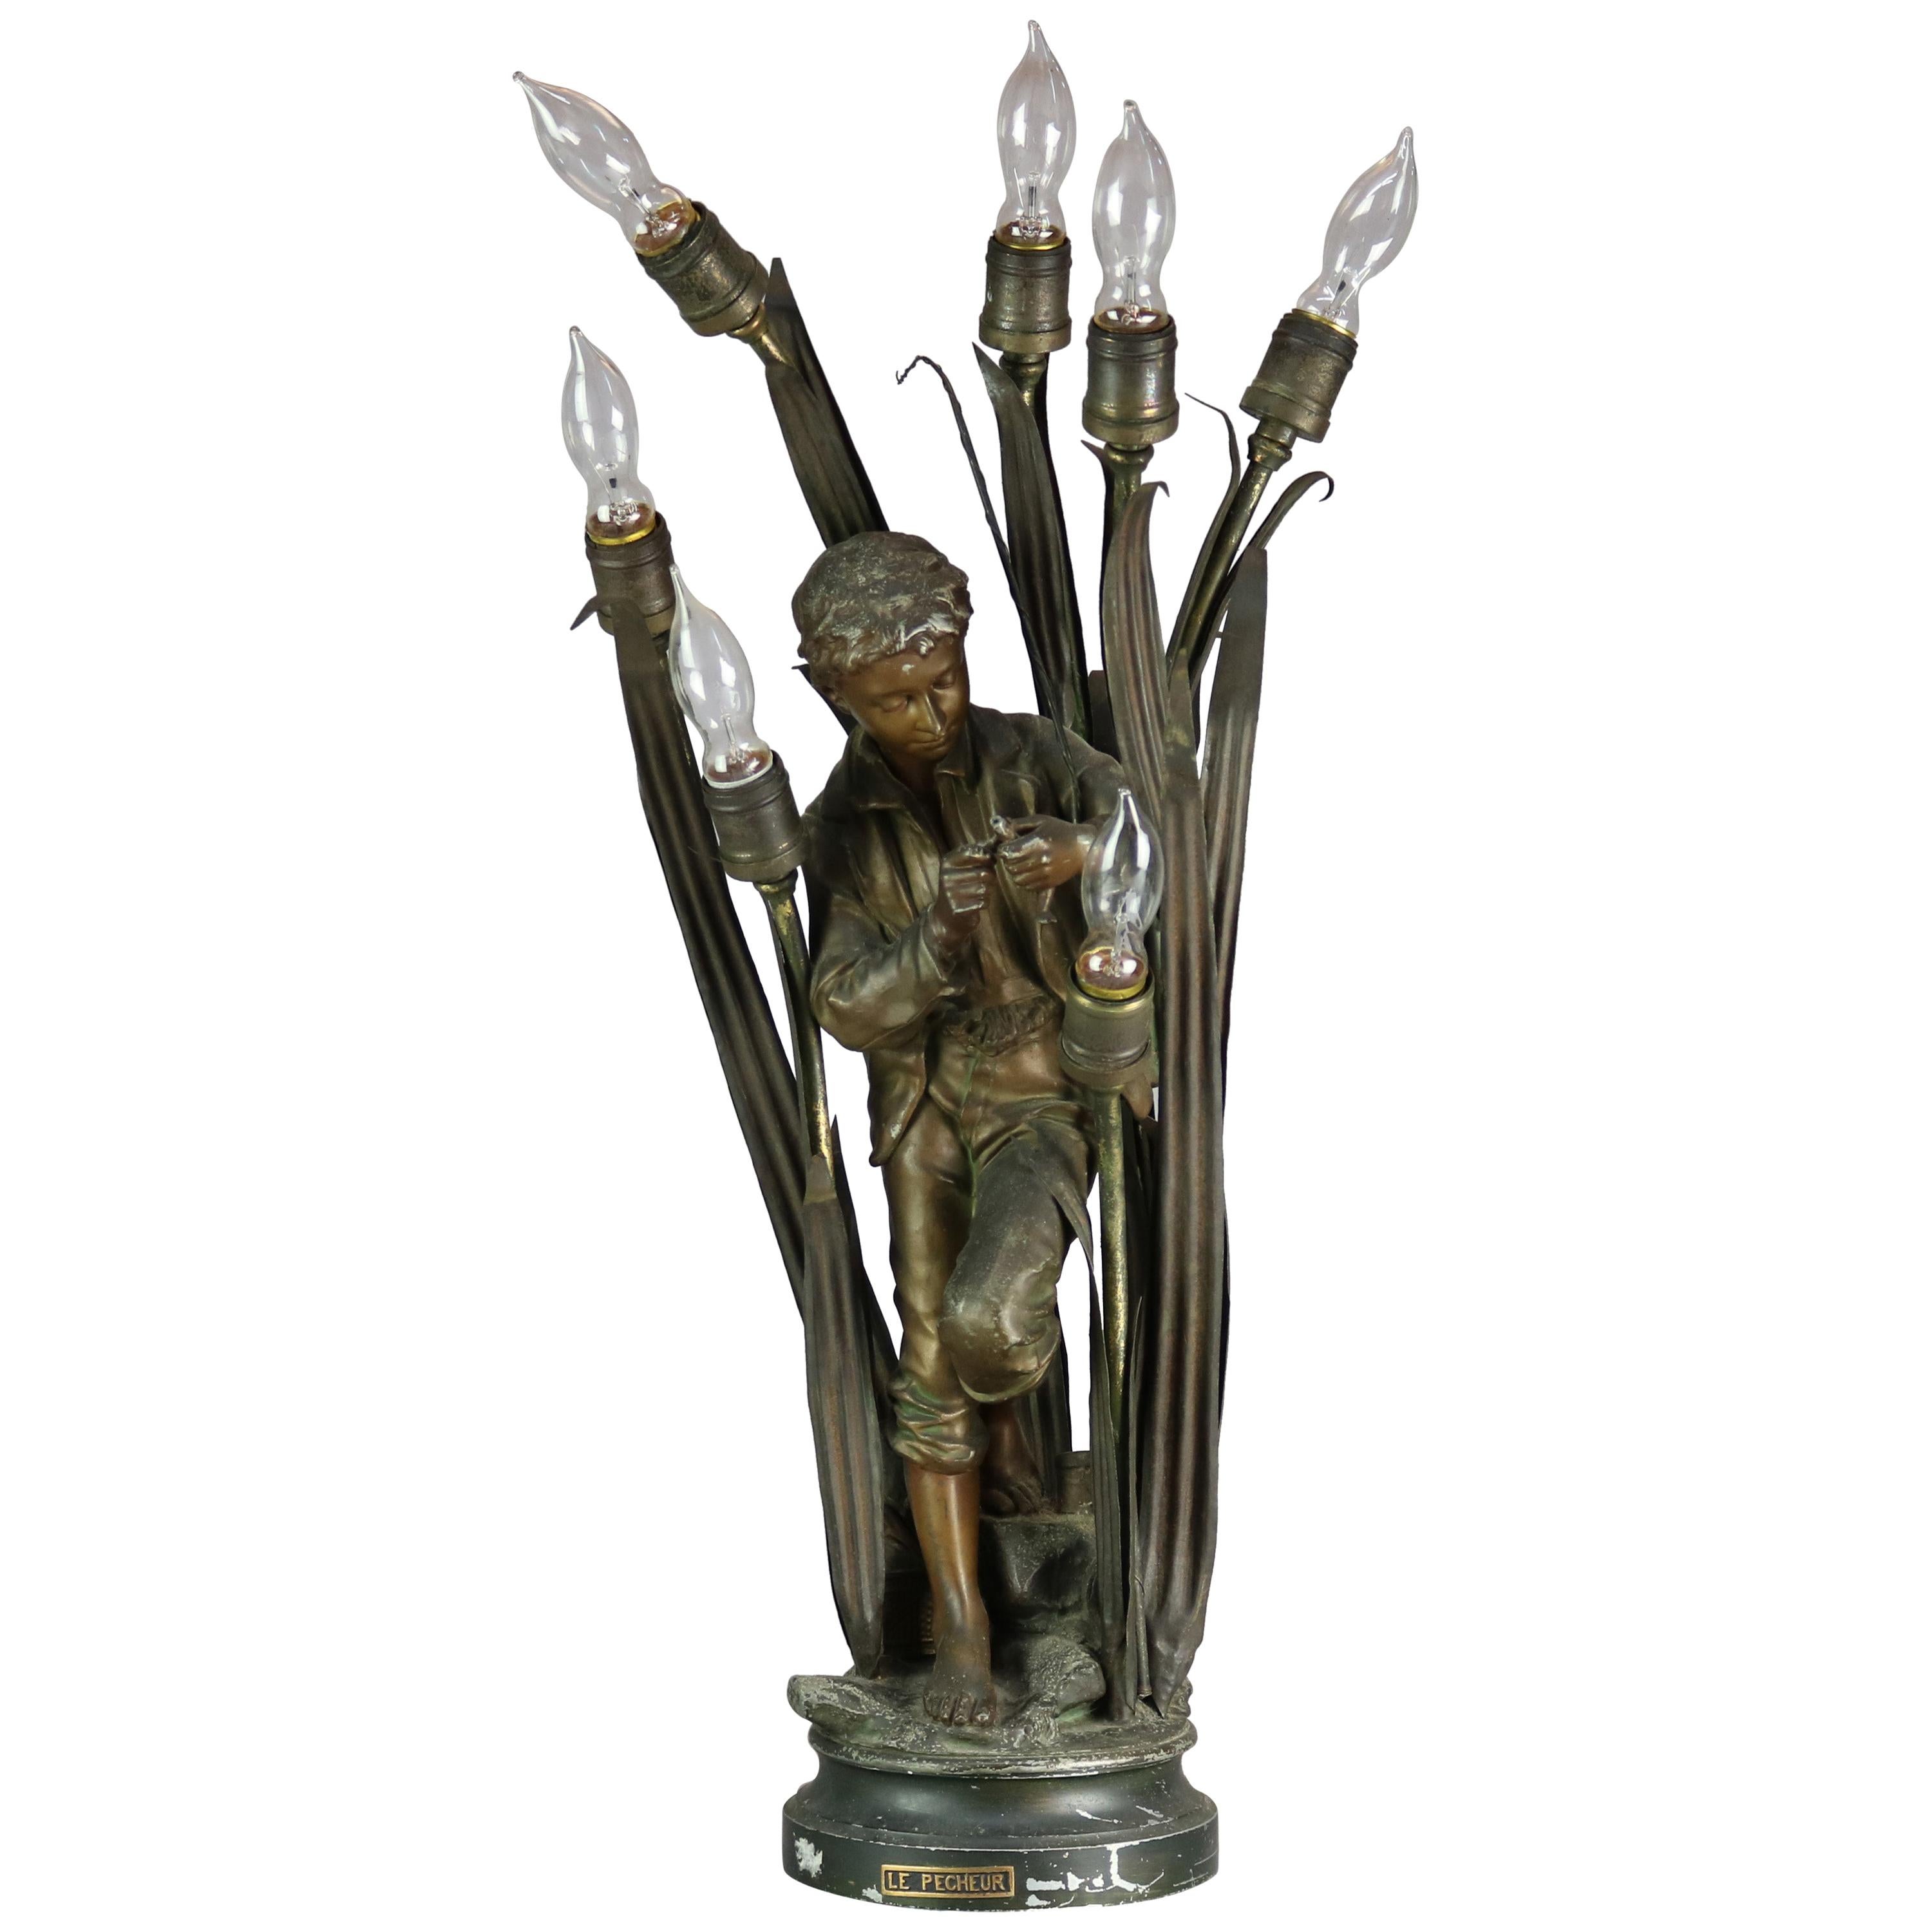 Antique French Bronzed Metal Figural 6-Light Newell Post Lamp, Le Pecheur, c1890